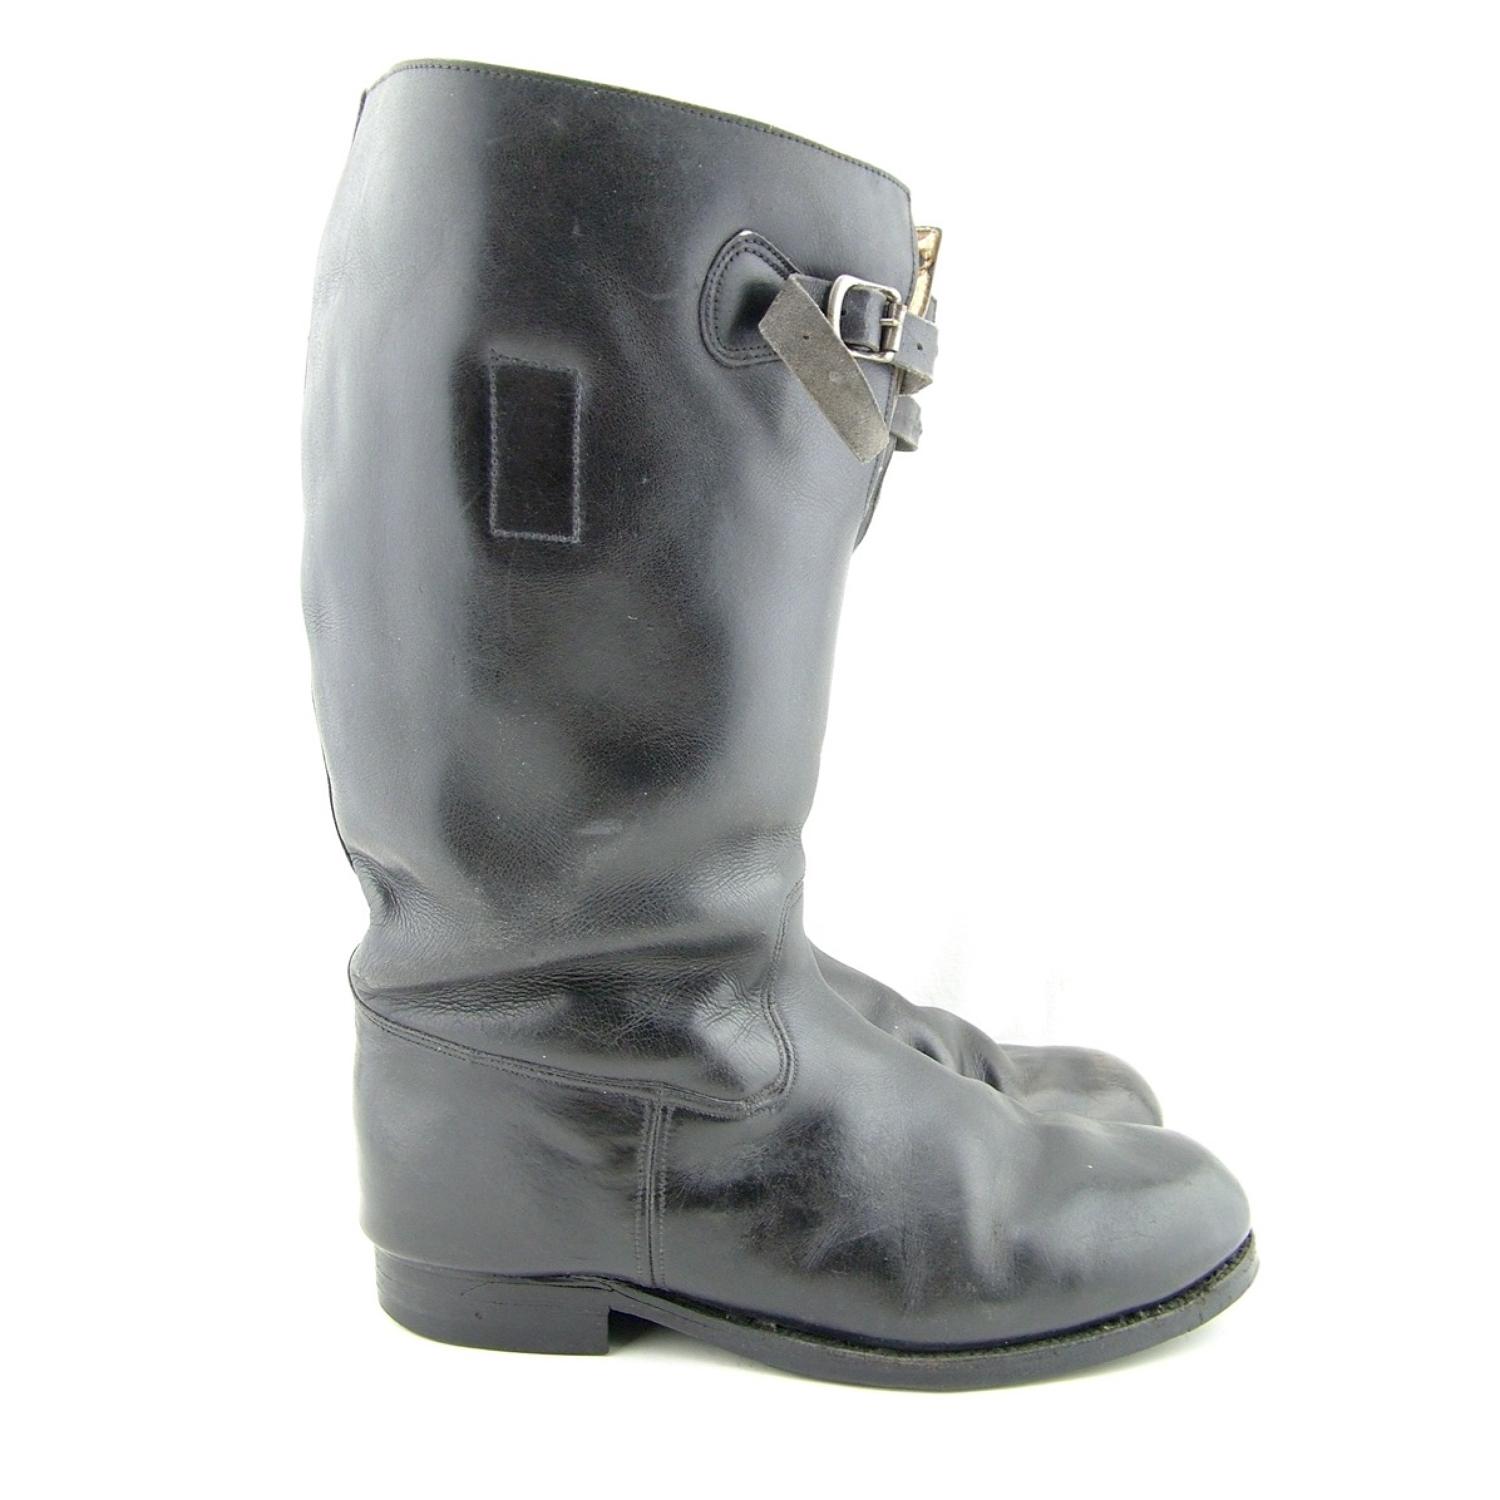 RAF 1936 pattern flying boots, S8